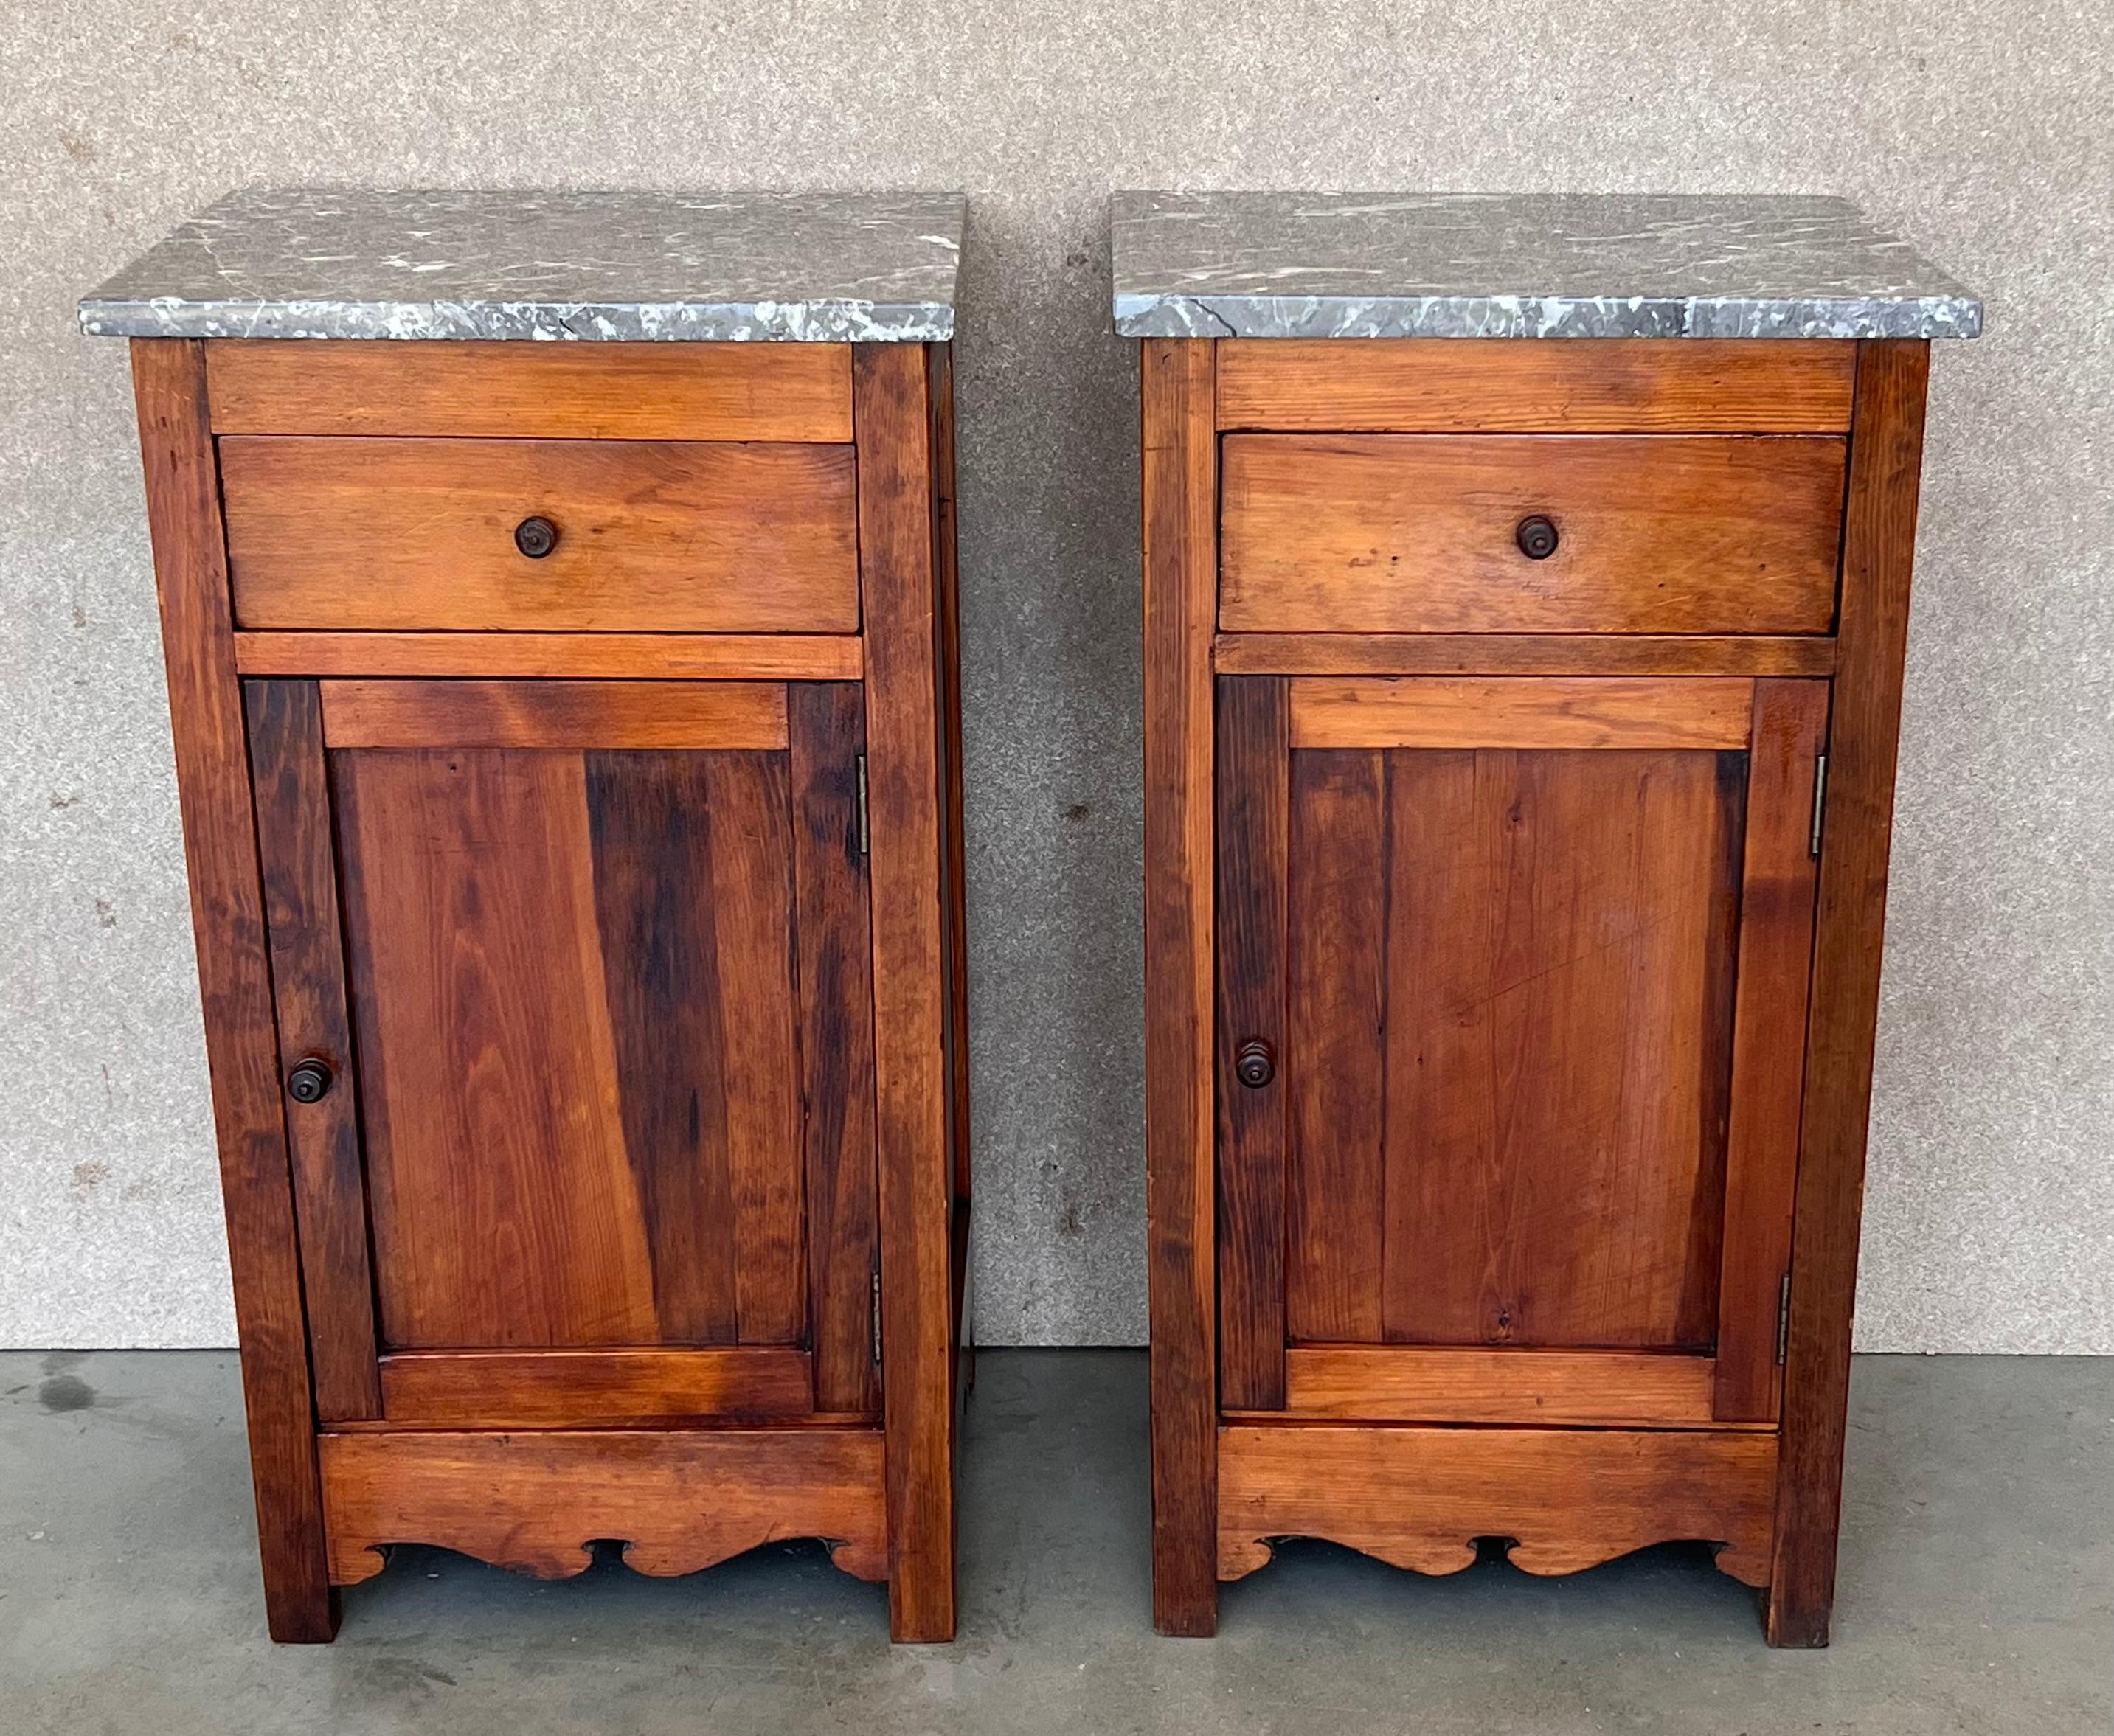 Pair of antique Biedermeier style bedside cabinets, late 19th-early 20th century, possibly French or Spanish, each in oblong rectangular form, the marble atop a fabric-lined surface, over a conforming case fitted with a single drawer over a cabinet